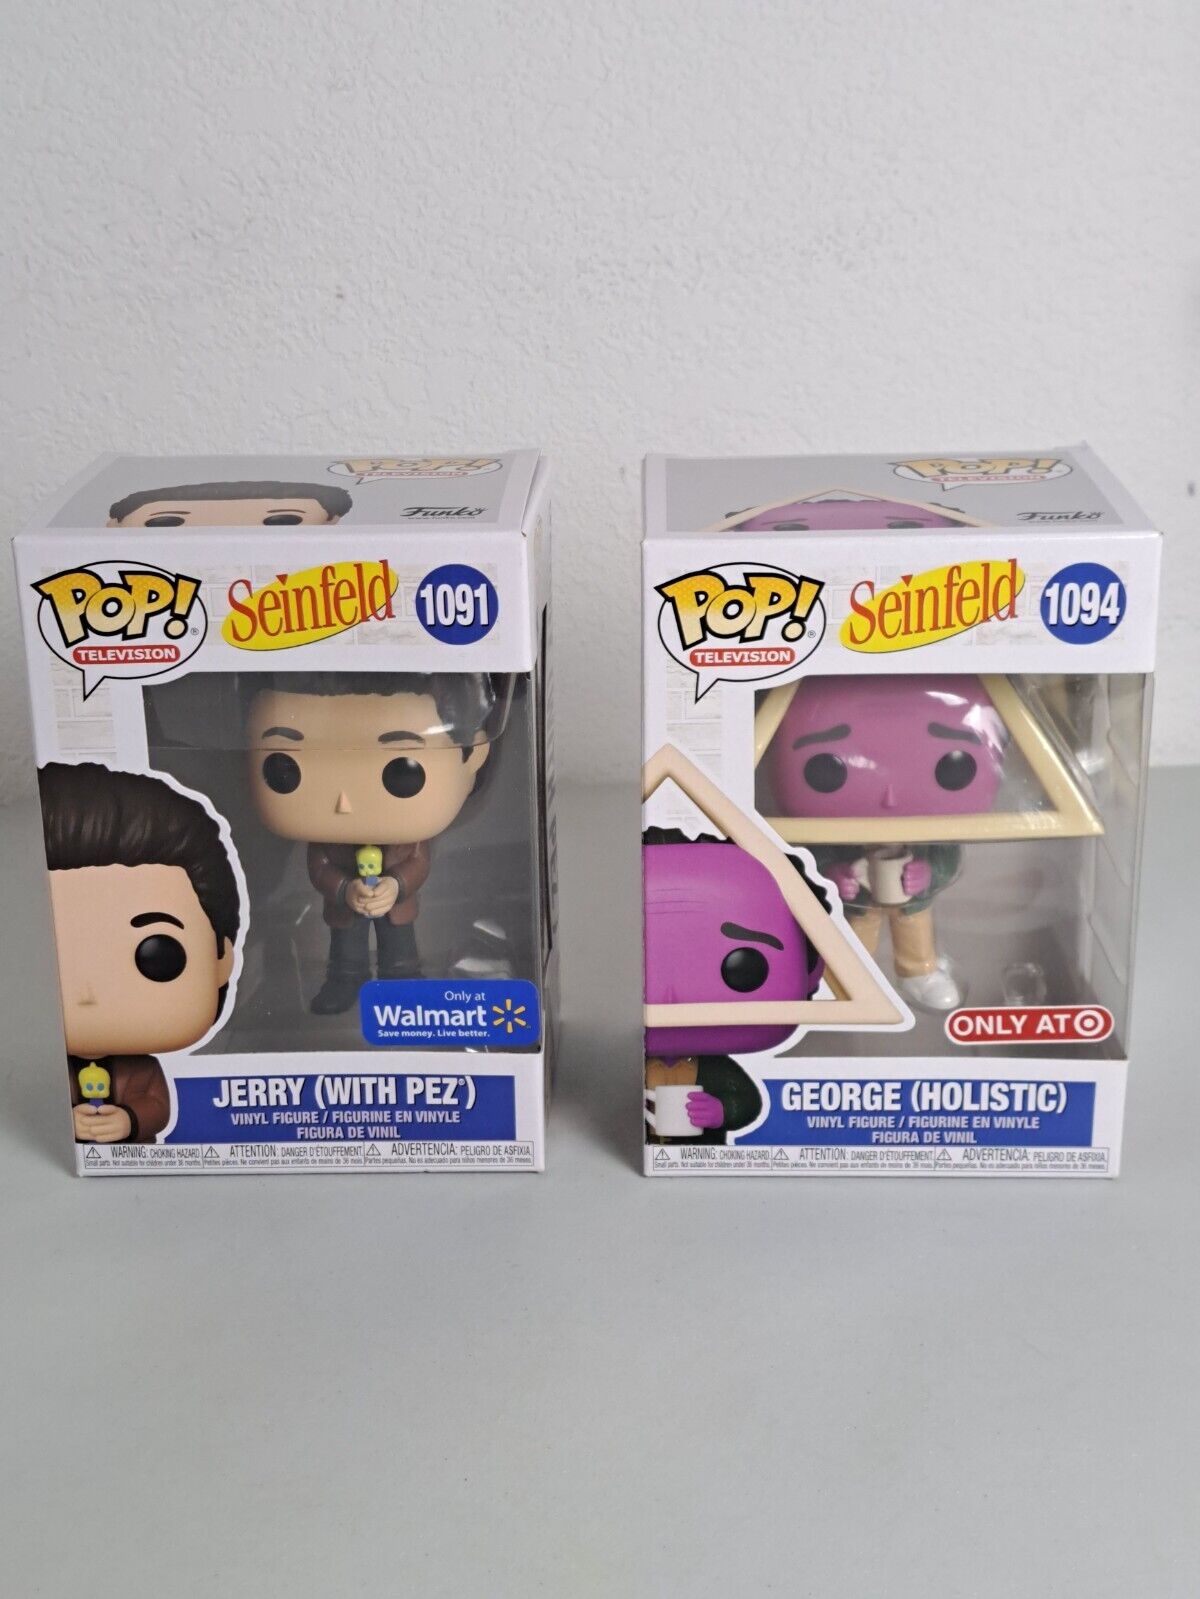 Funko Pop Television Seinfeld Jerry Seinfeld (With Pez} & George (Holistic)